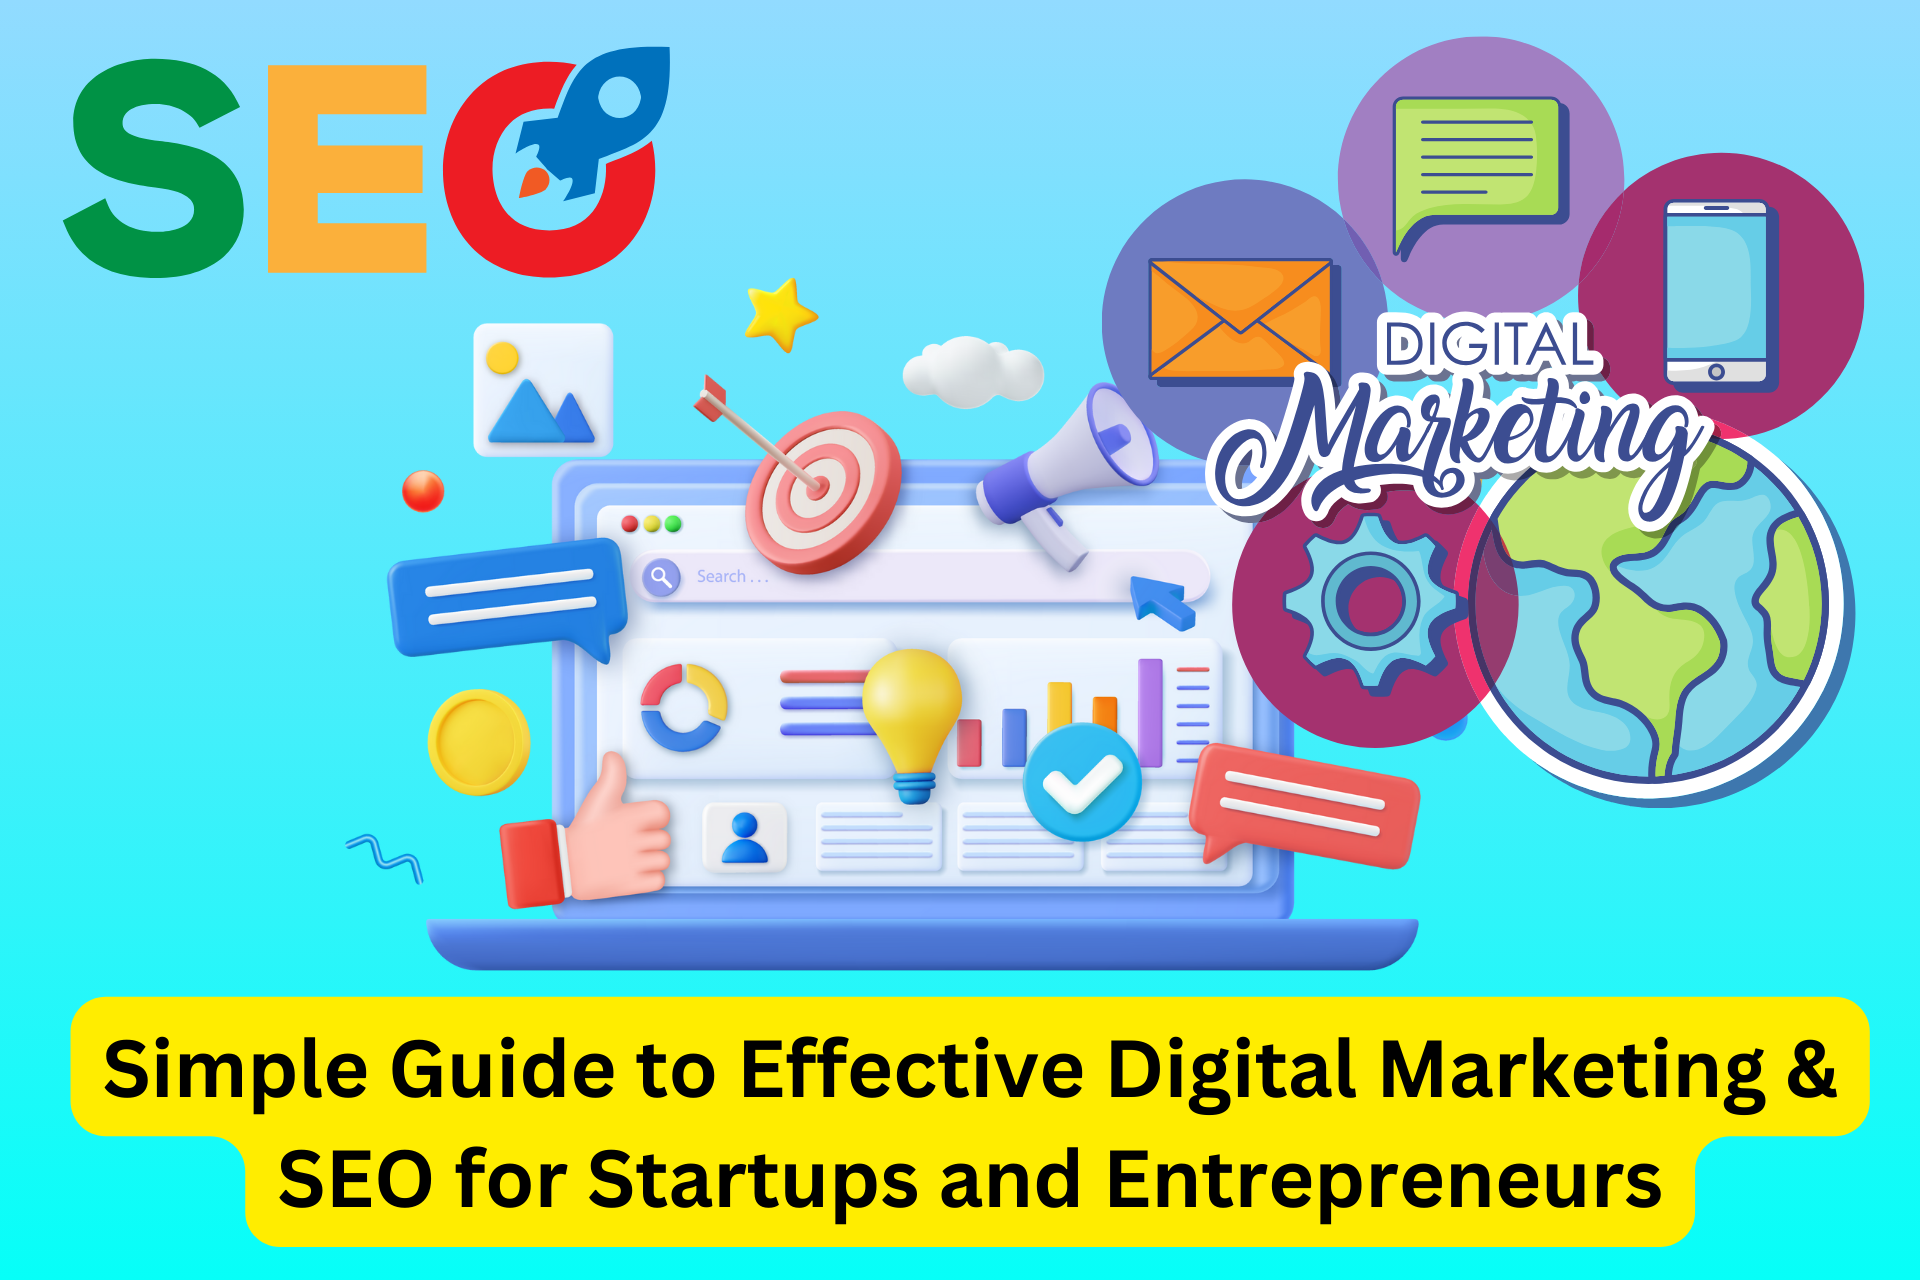 Simple Guide to Effective Digital Marketing & SEO for Startups and Entrepreneurs